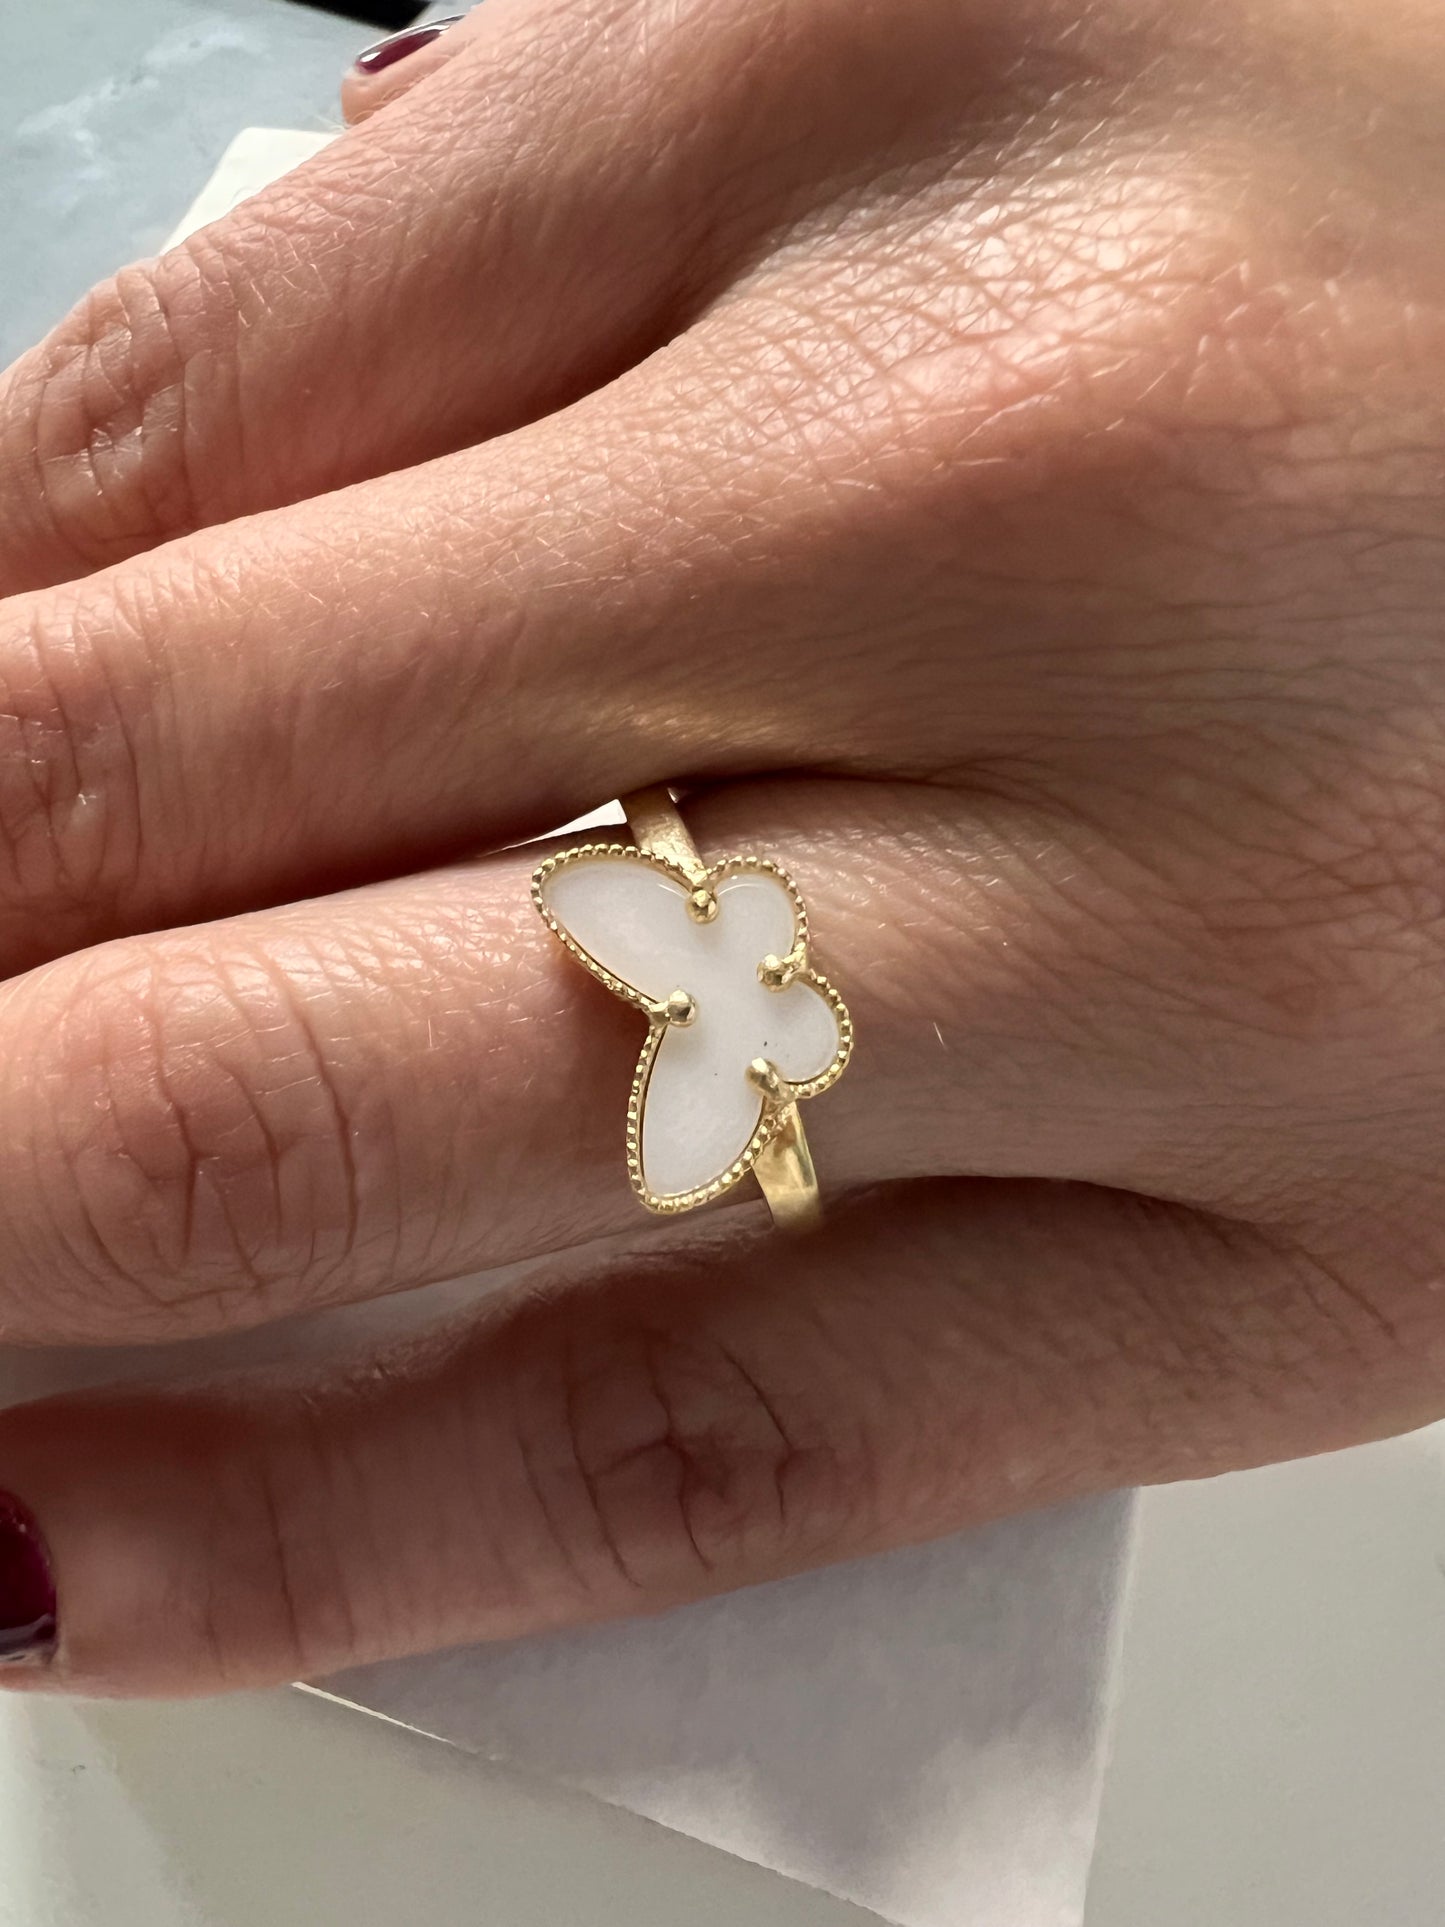 14K Yellow gold butterfly mother pearl ring-227074